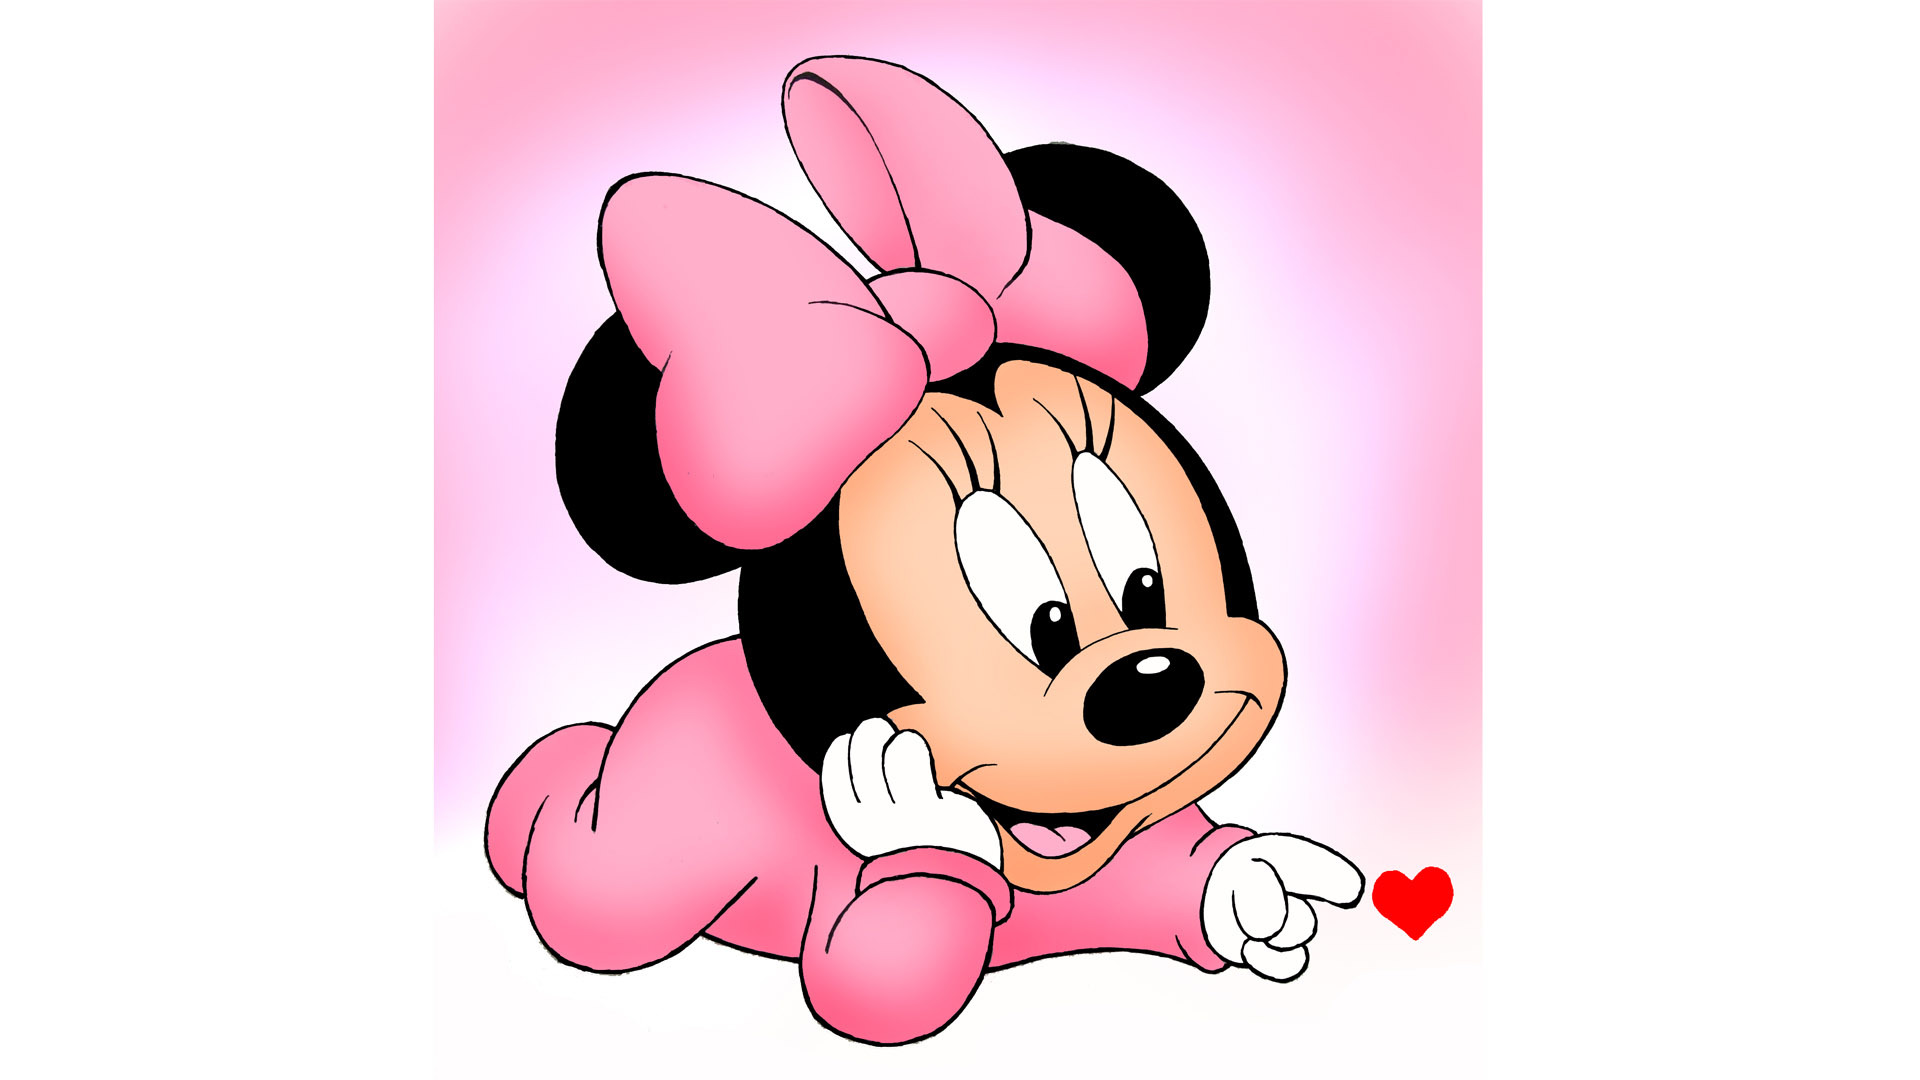 Minnie Mouse Wallpapers Images Photos Pictures Backgrounds HD Wallpapers Download Free Images Wallpaper [wallpaper981.blogspot.com]